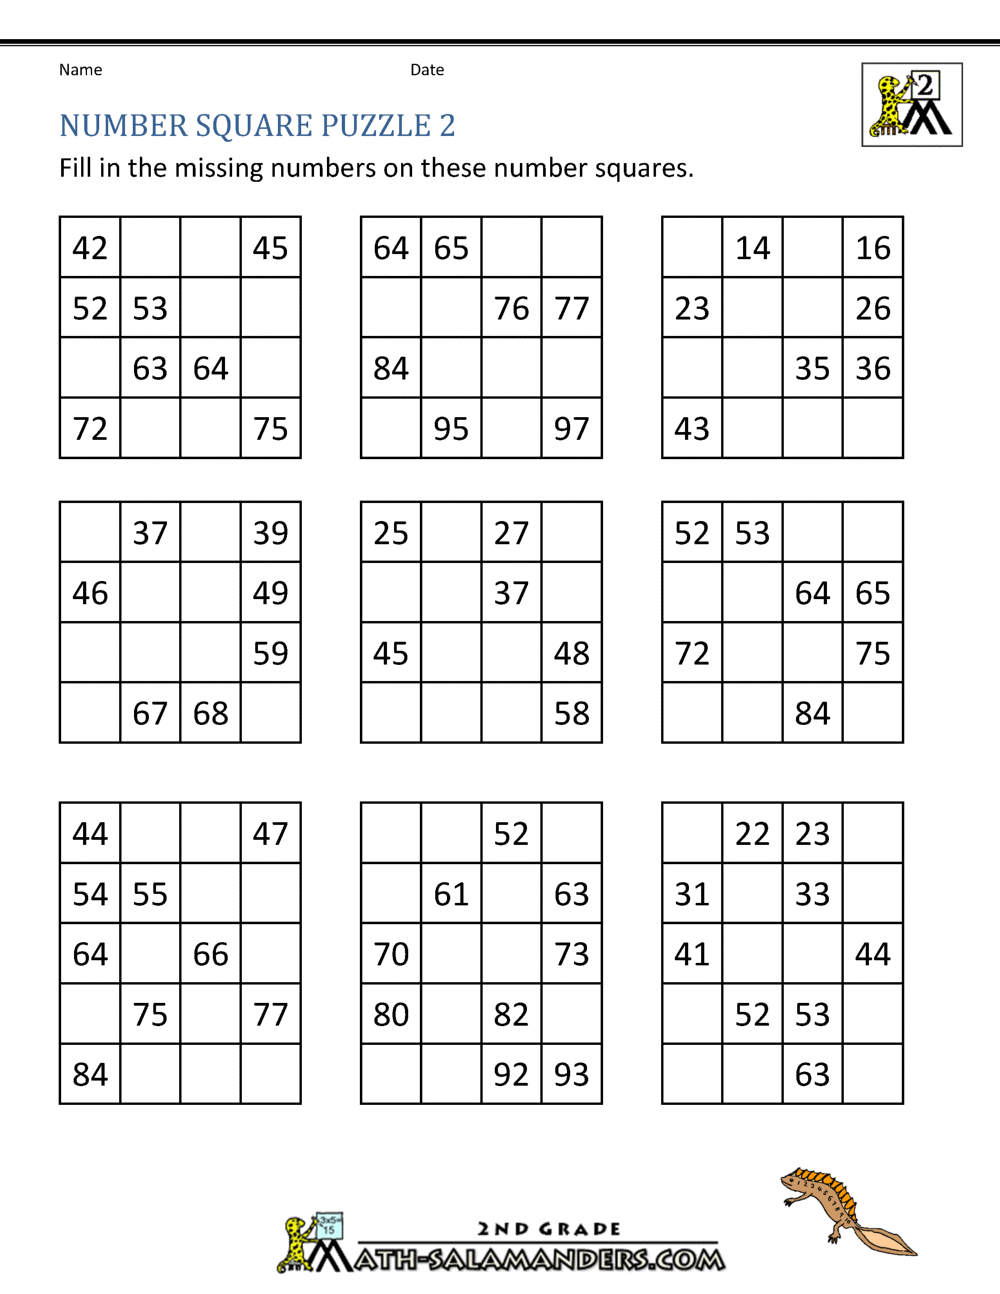 20-missing-numbers-addition-worksheets-worksheet-from-home